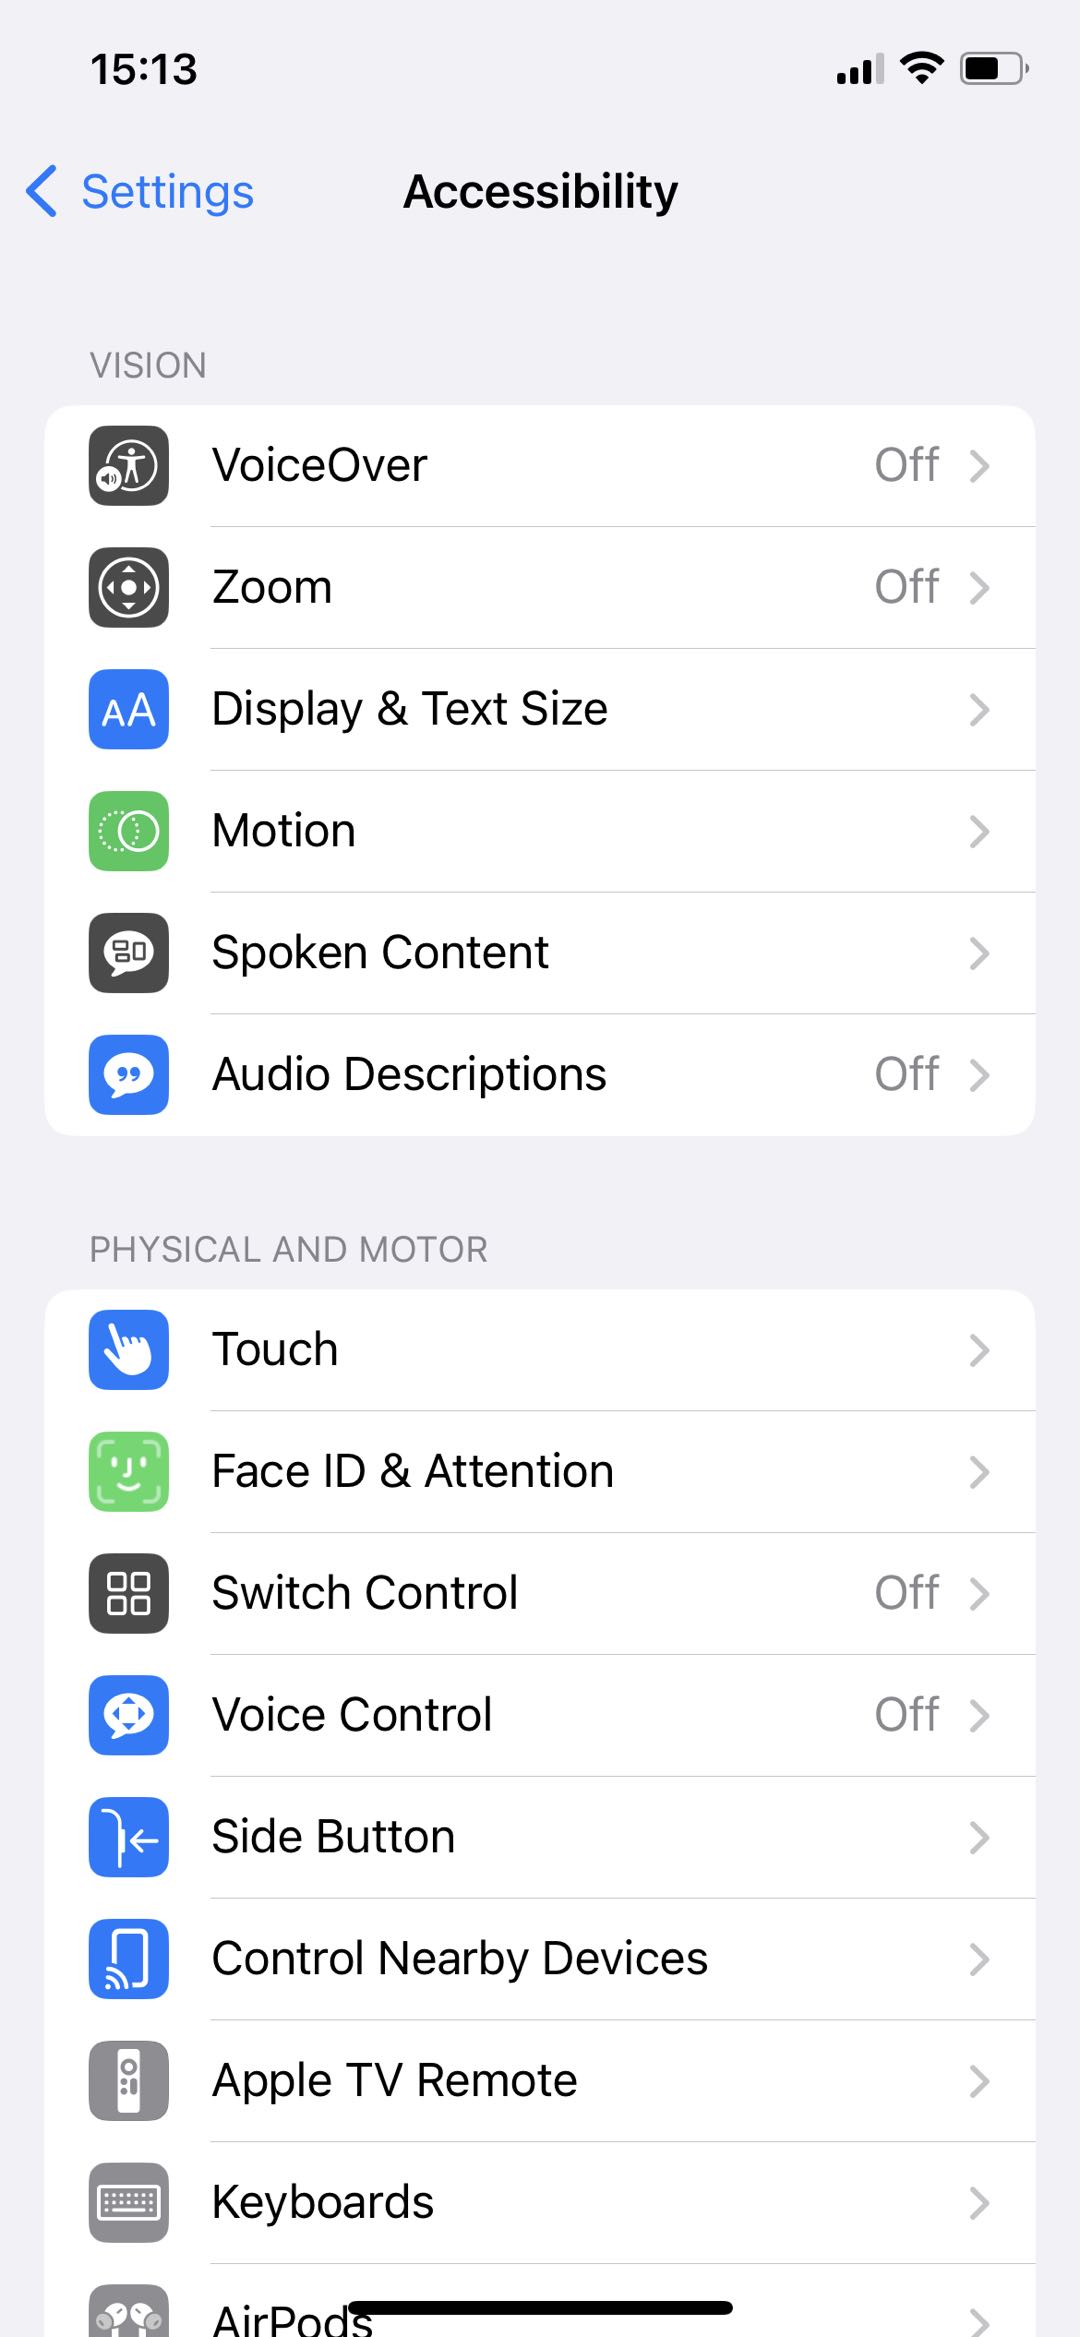 iPhone display and text size